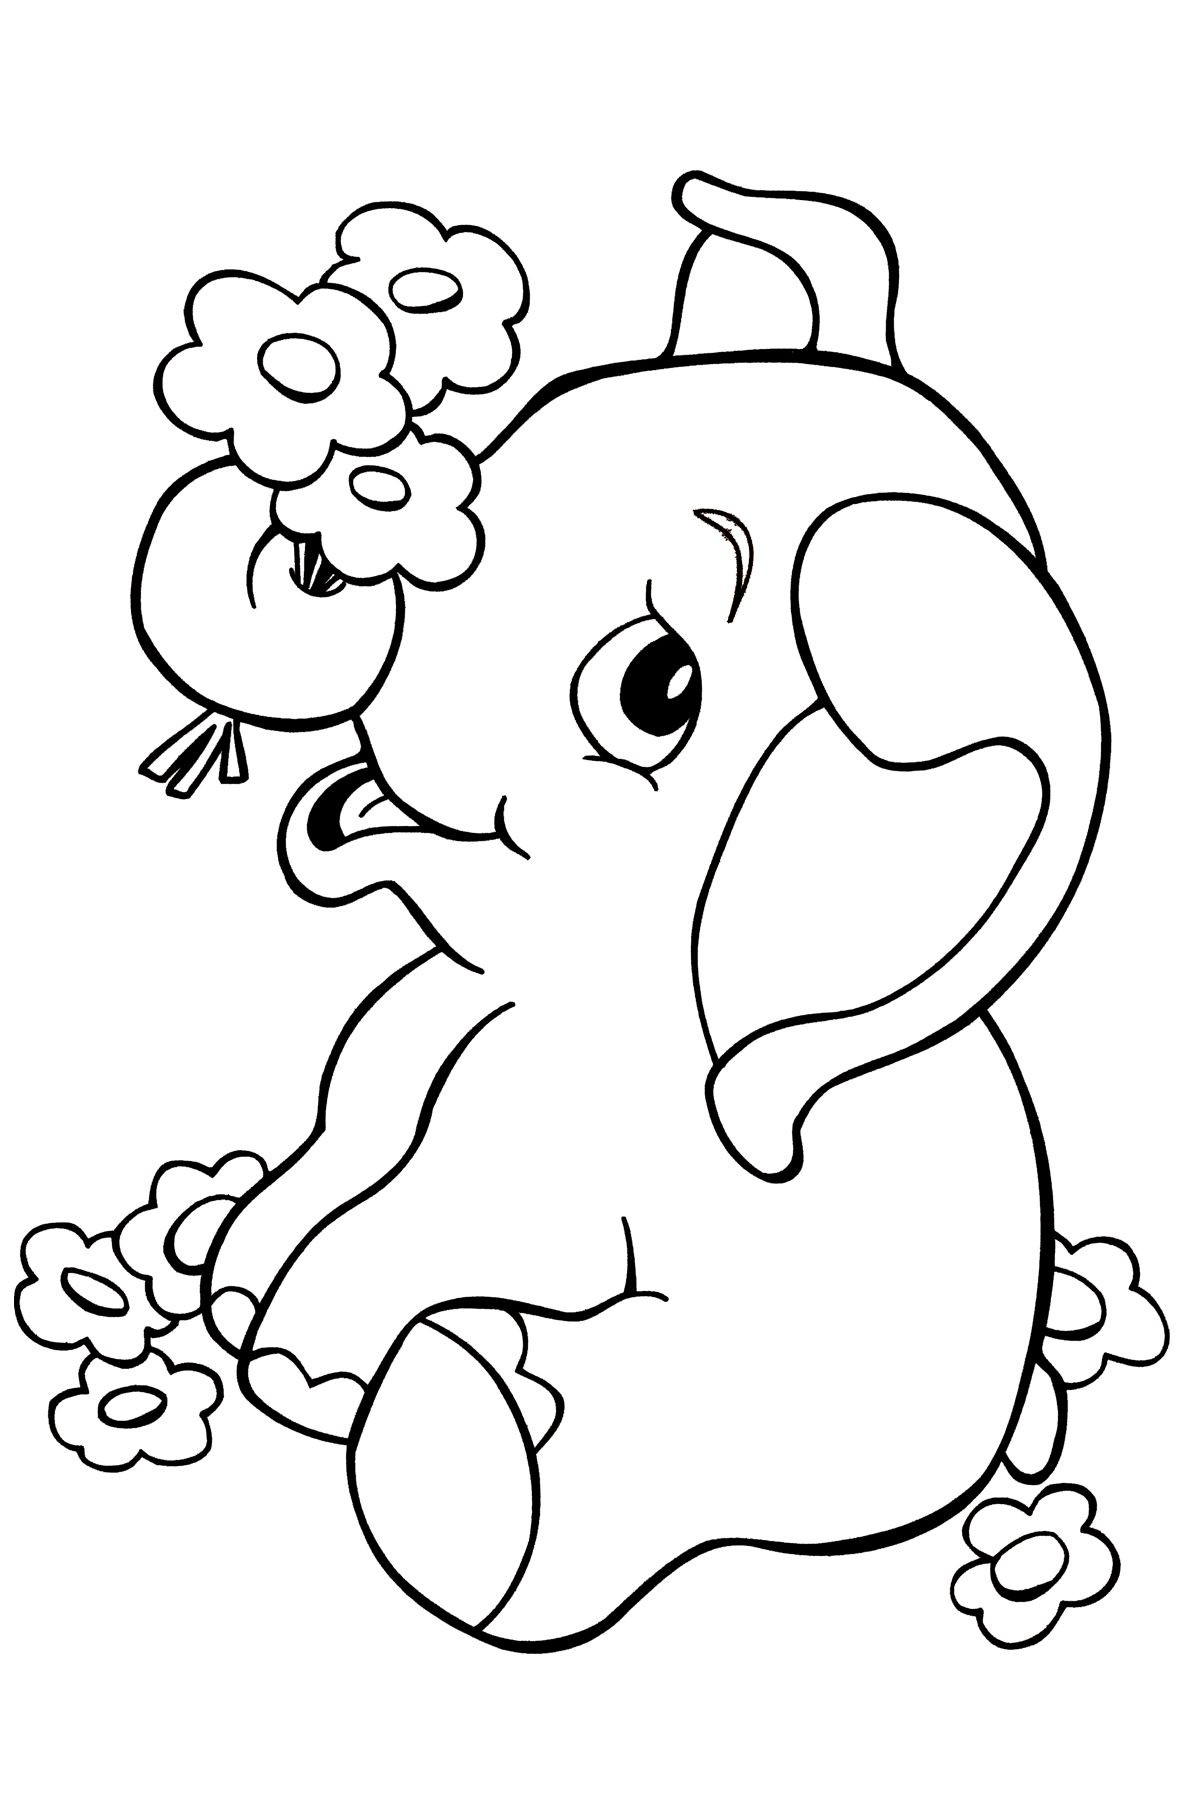 Printable Coloring Pages For Kids Animals
 Jungle Coloring Pages Best Coloring Pages For Kids